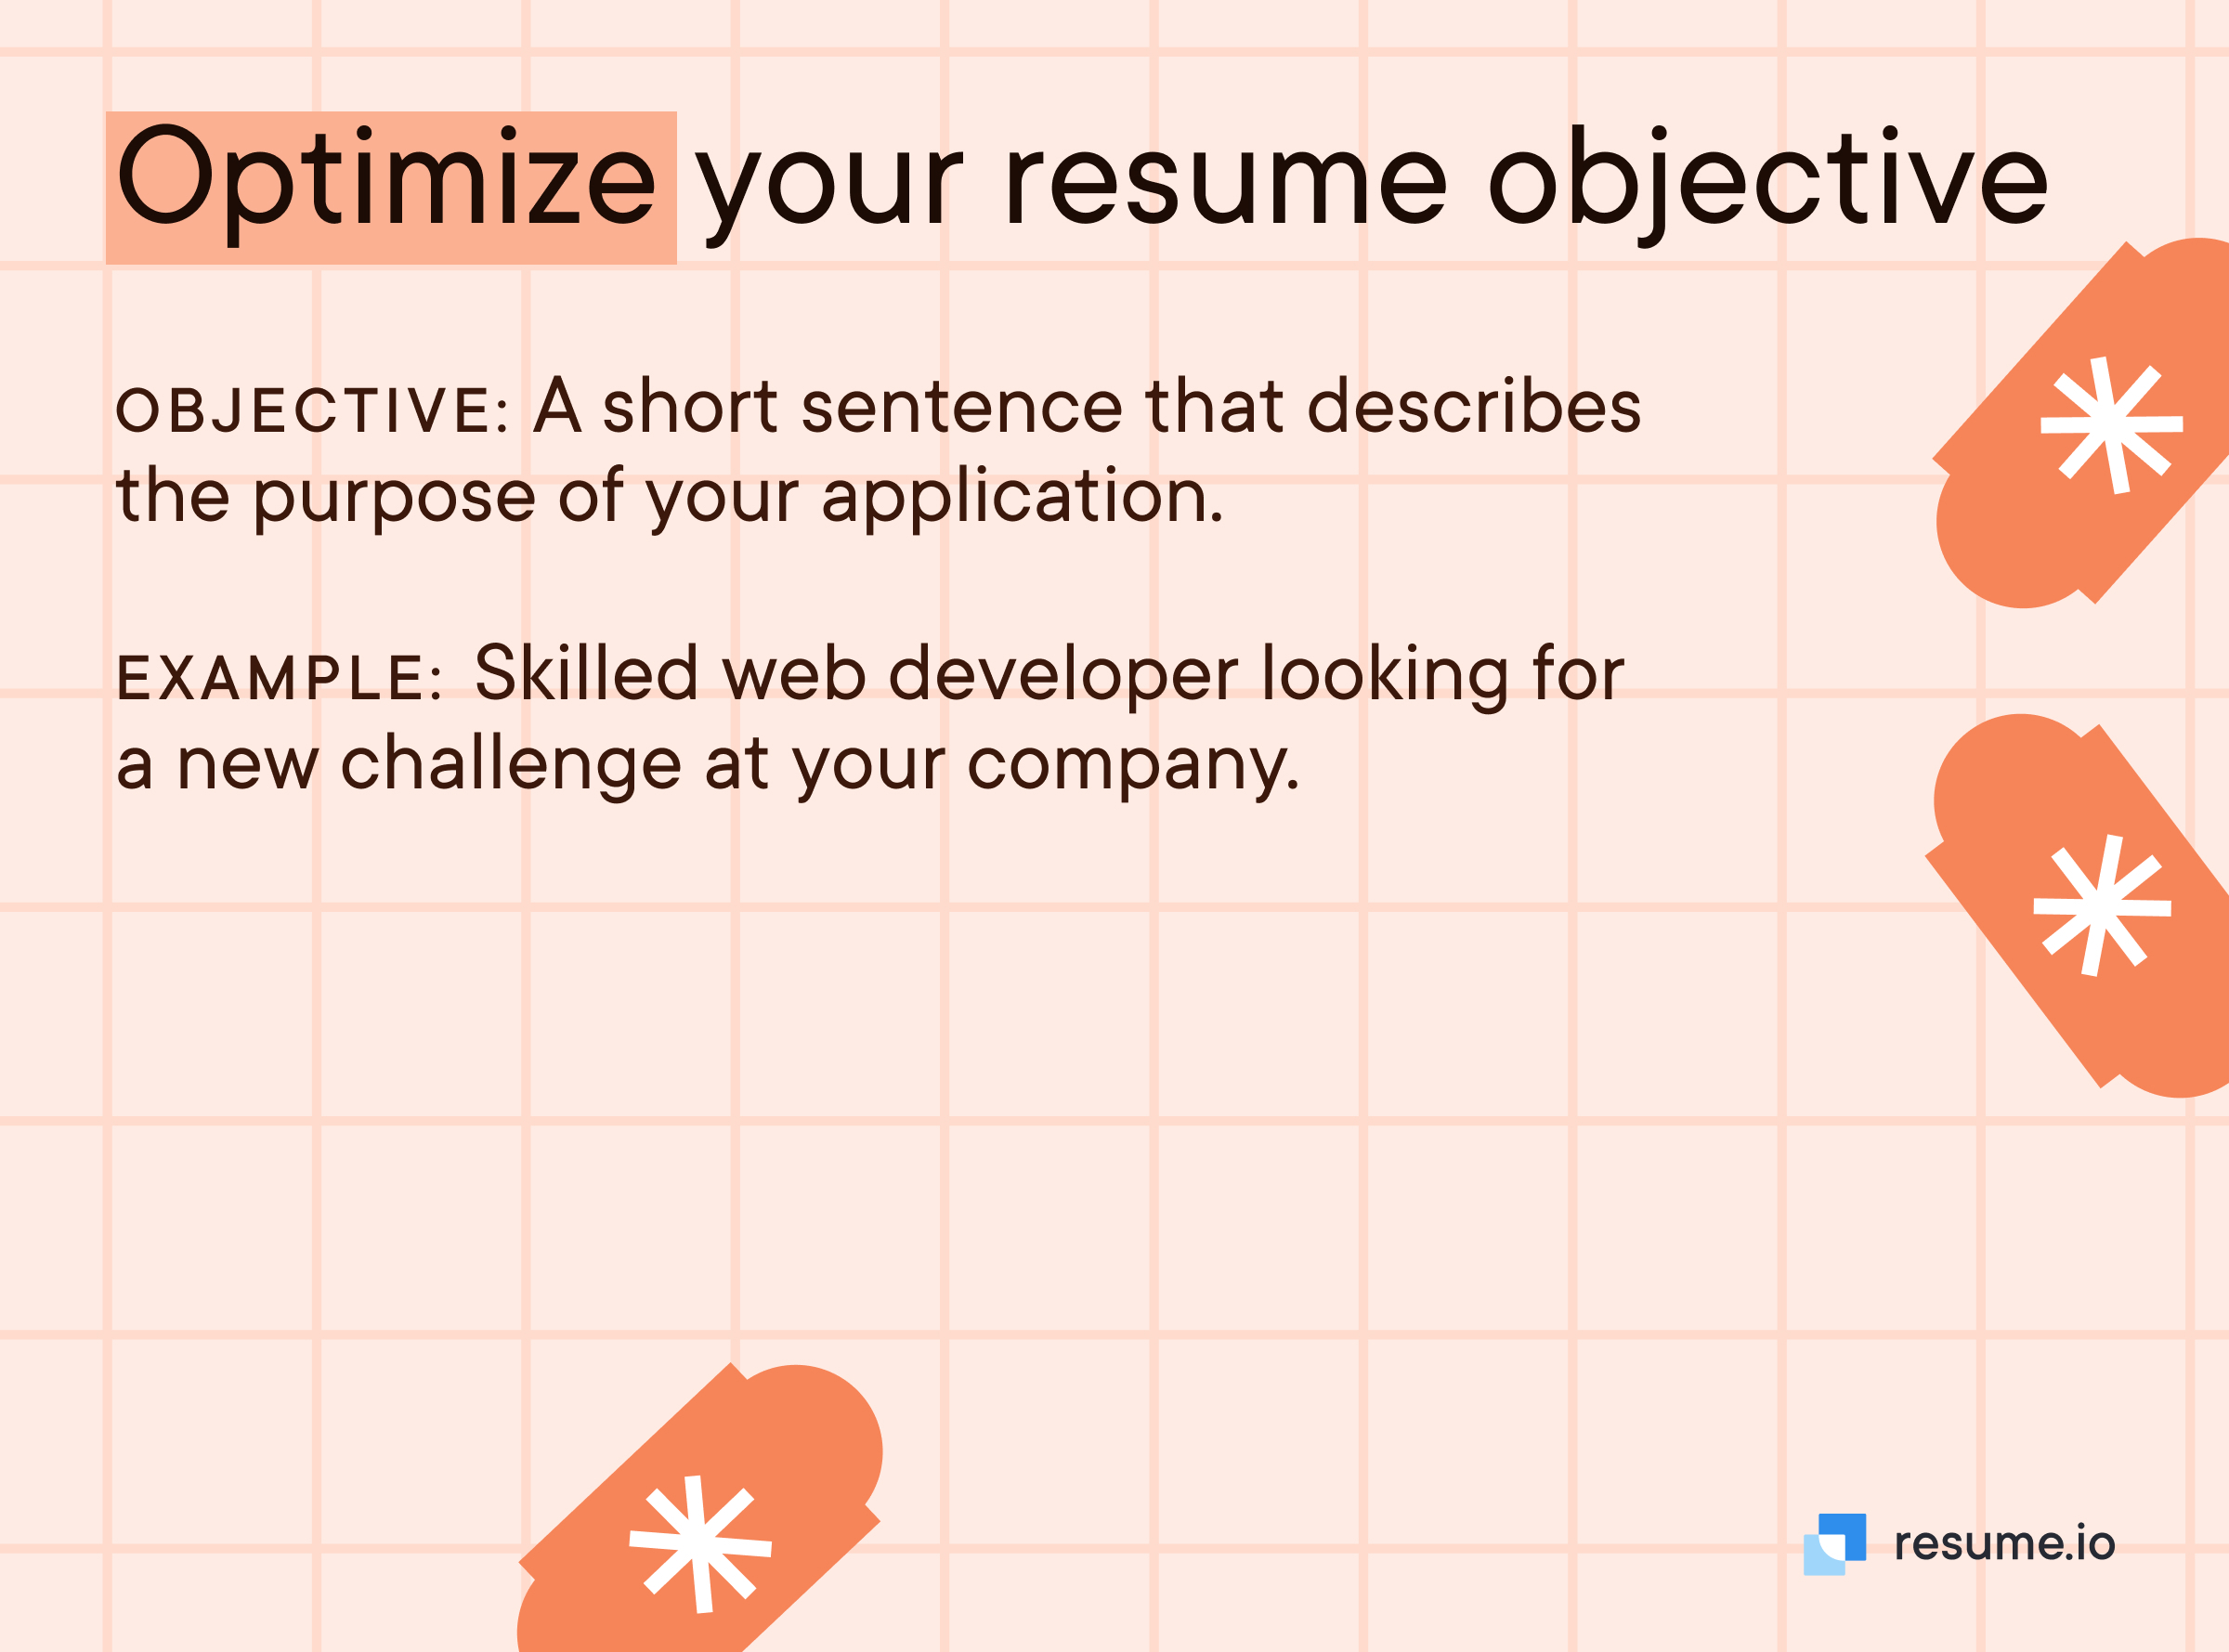 Optimize your resume objectives